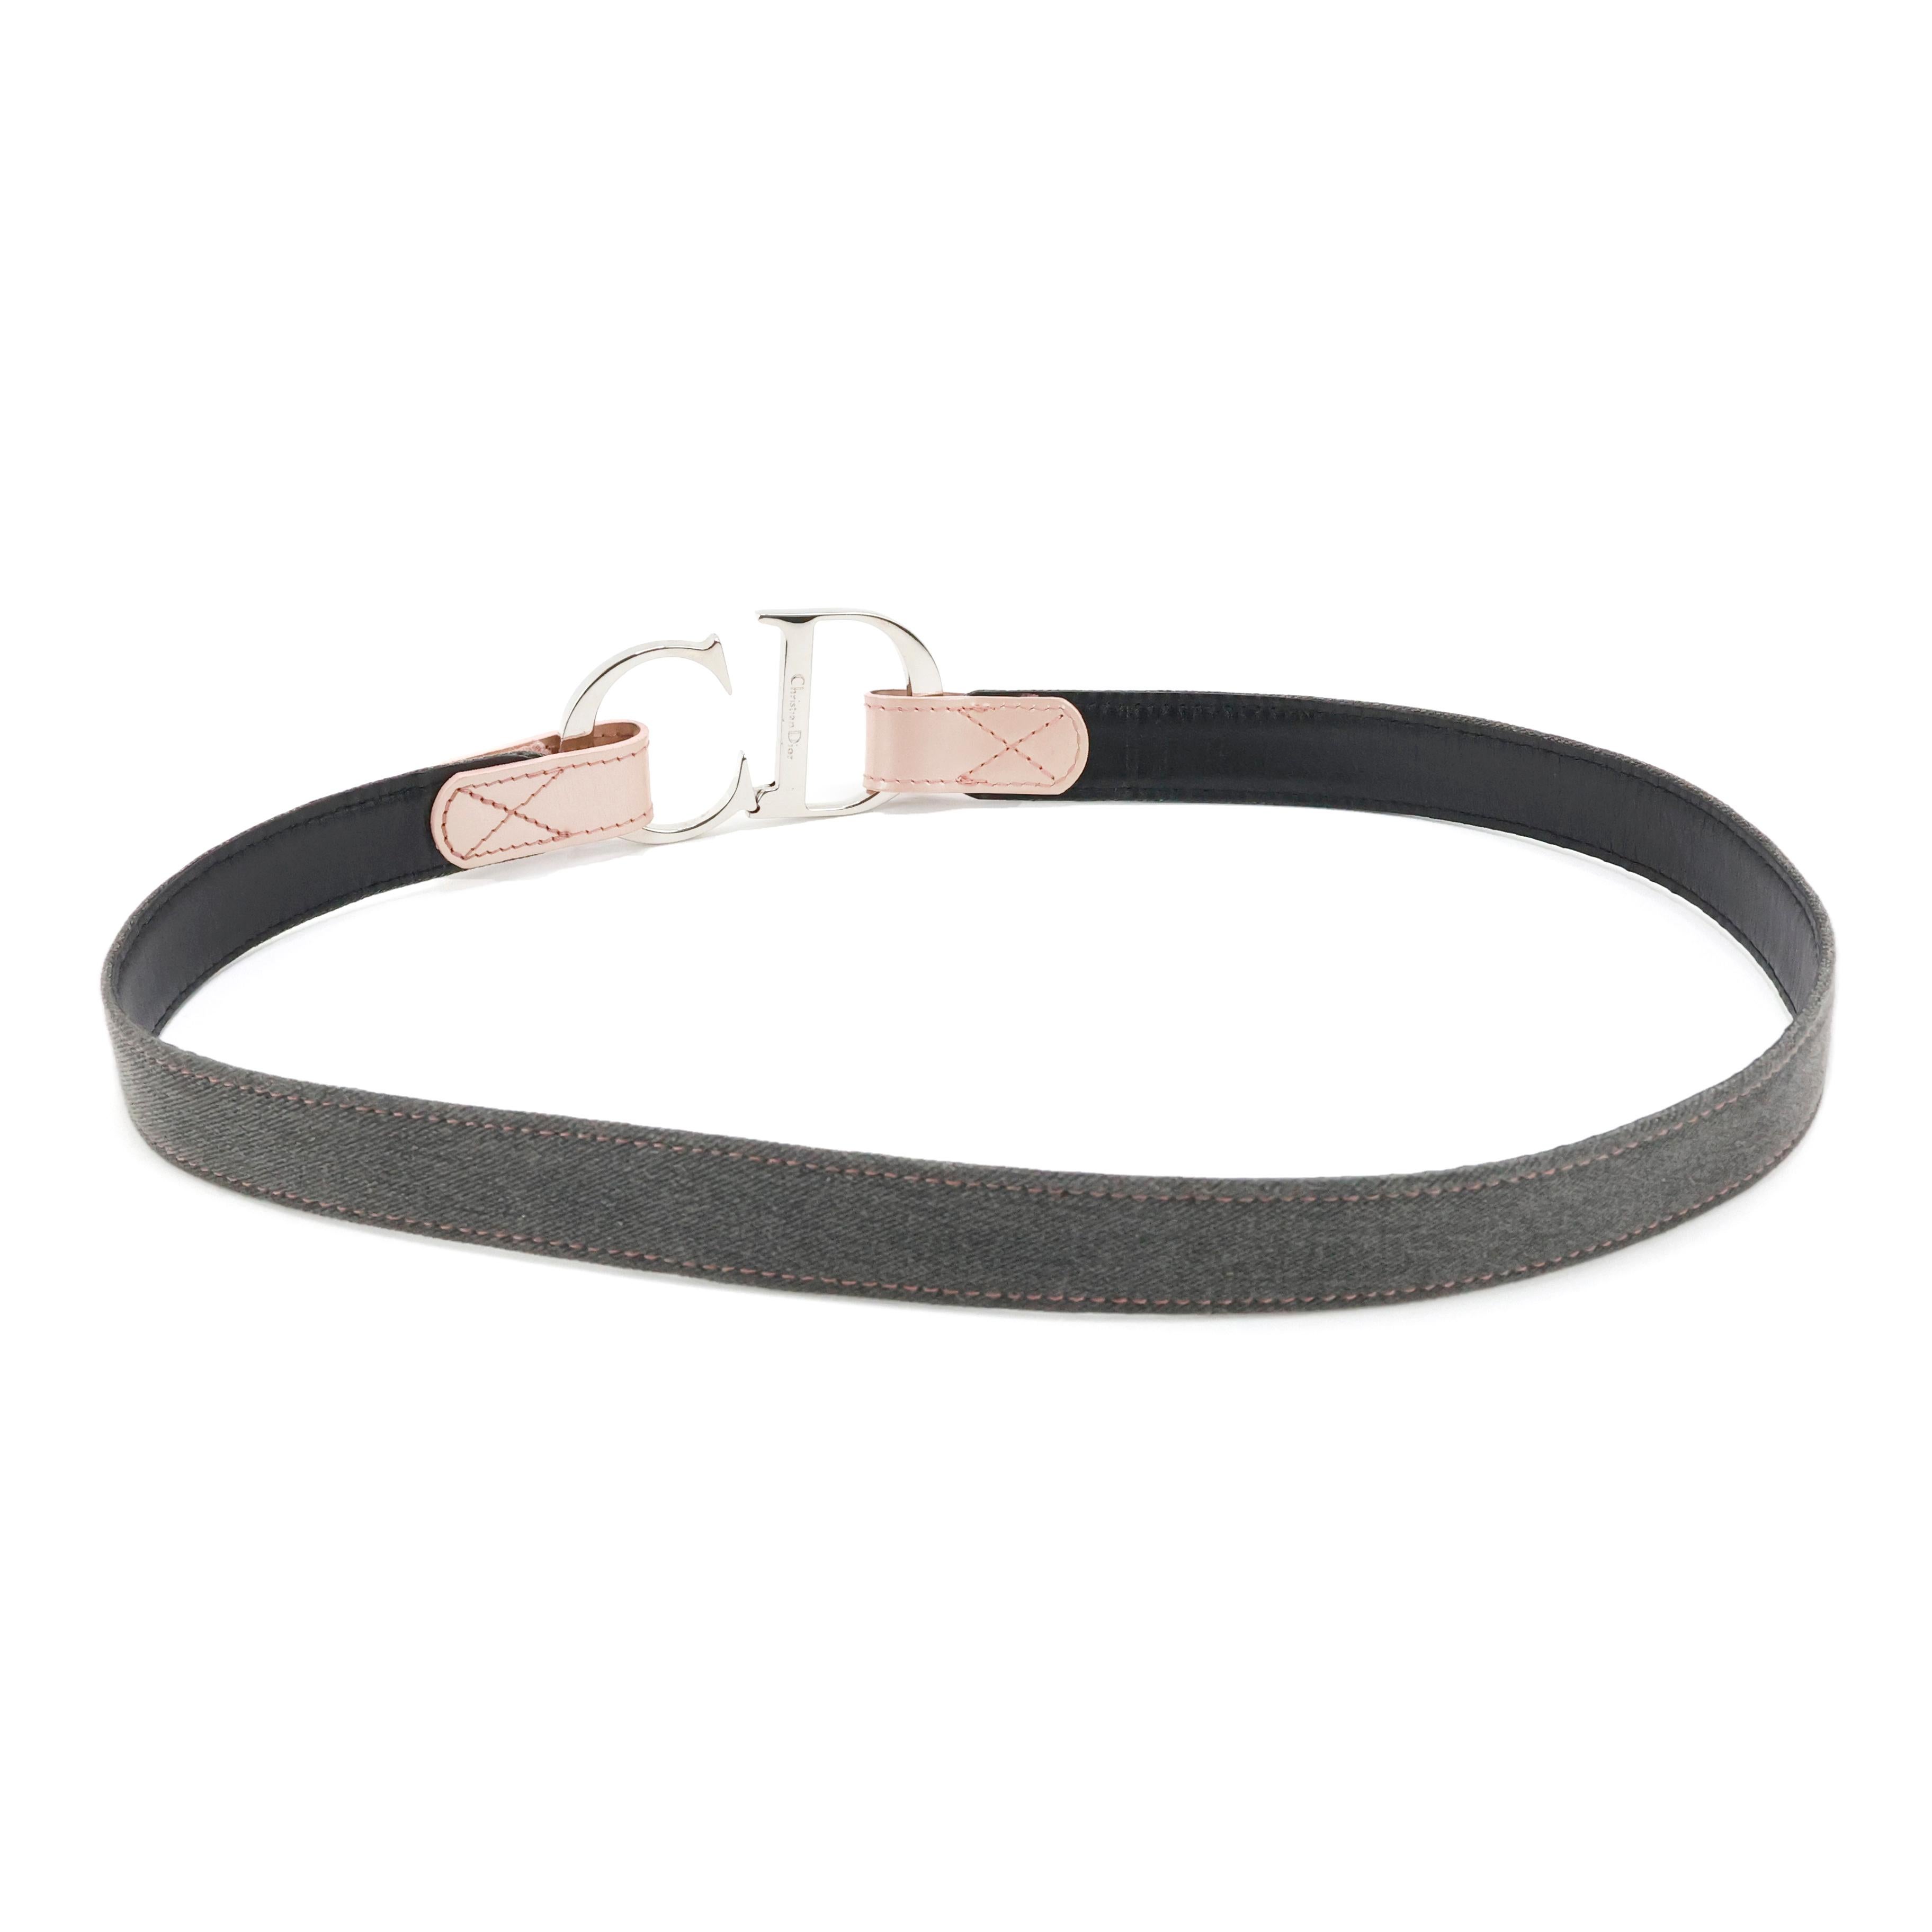 Christian Dior CD belt in grey denim and leather, silver hardware. Size 75cm.